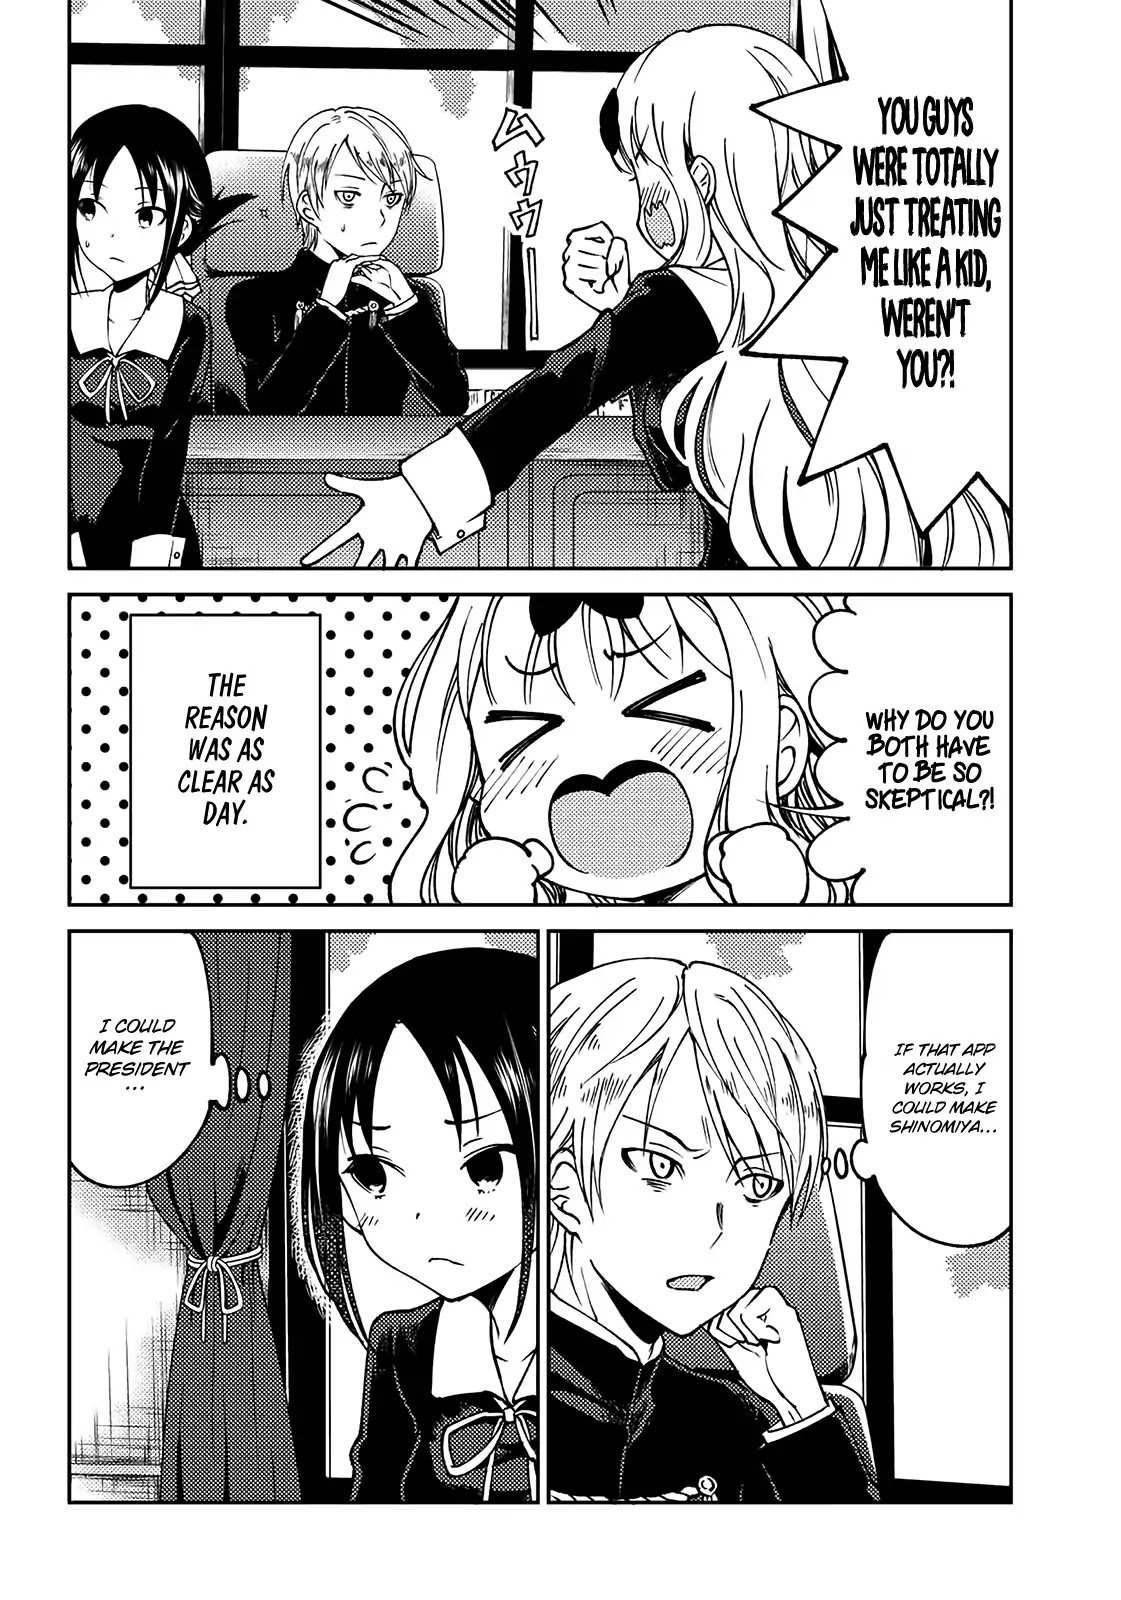 kaguya-wants-to-be-confessed-to-official-doujin-chap-3-5